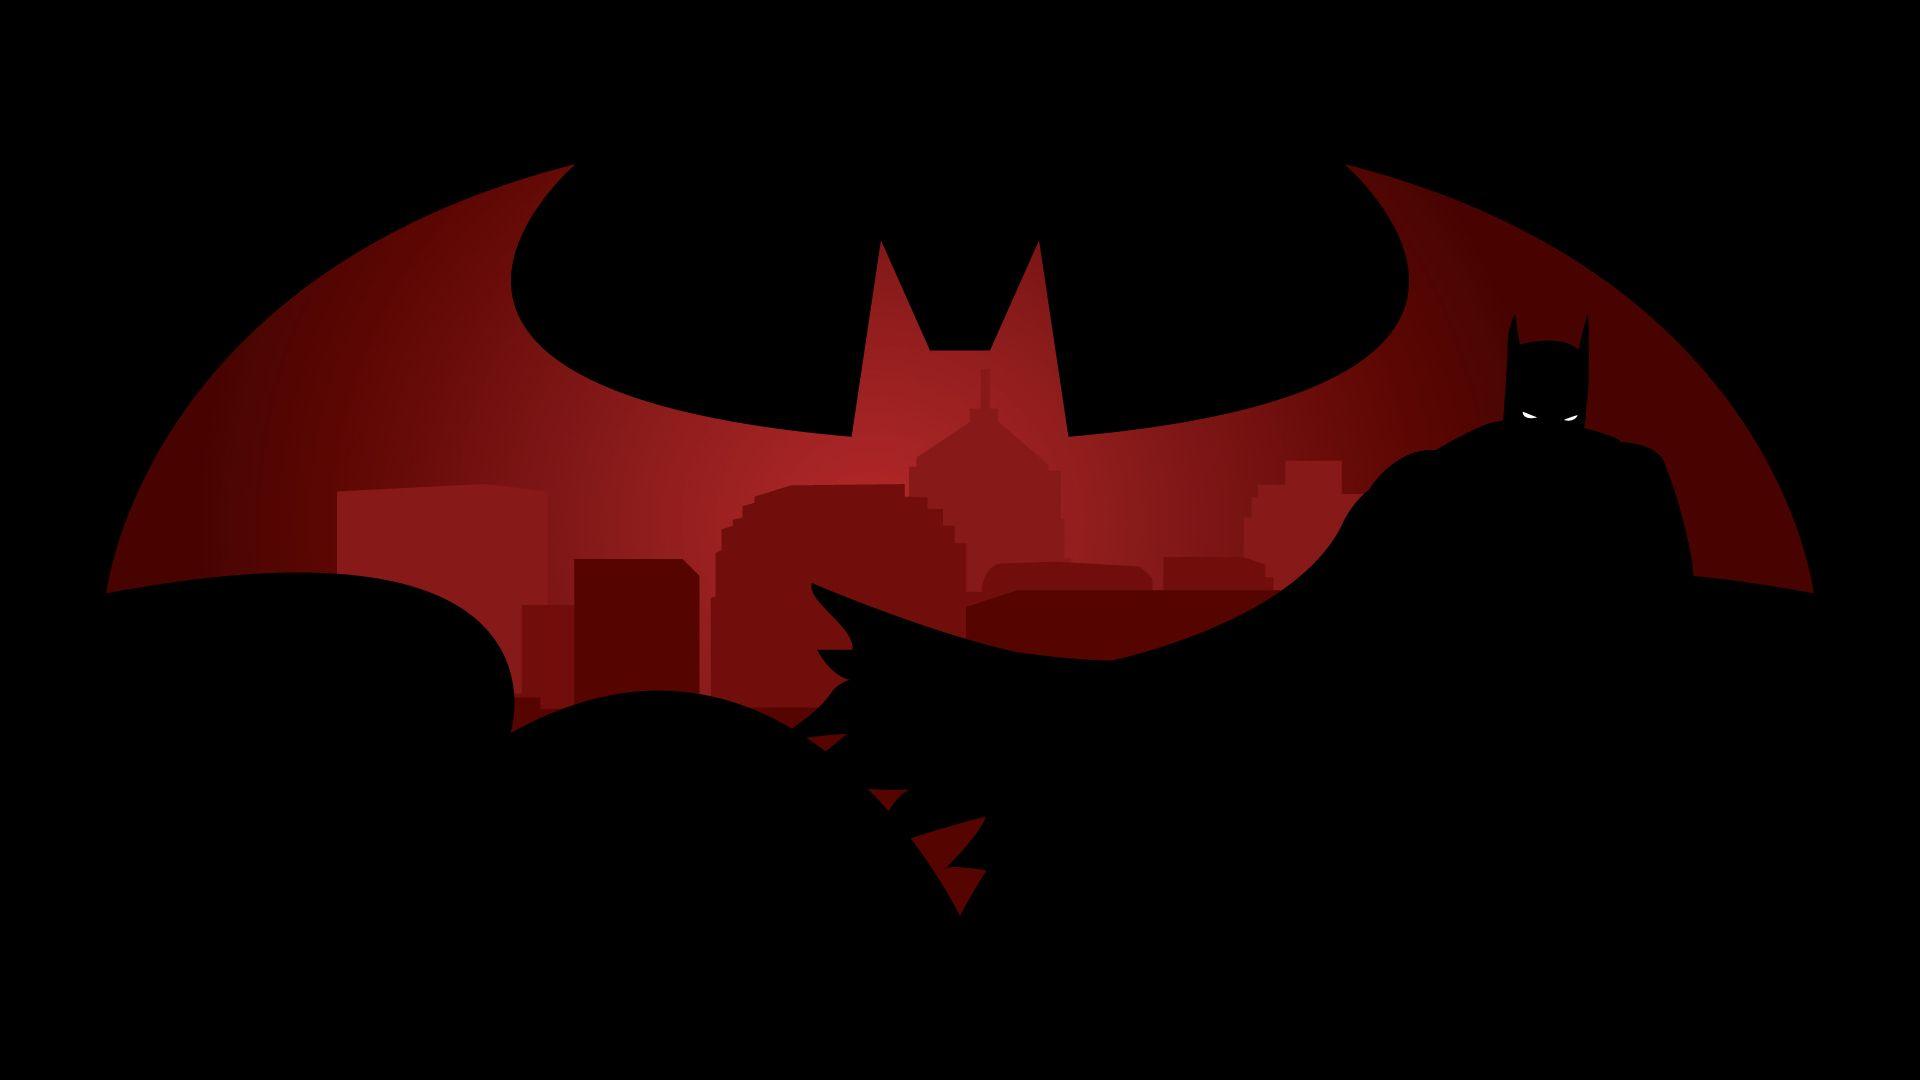 Black and Red Batman Logo - I just put this design together. Any thoughts? : batman